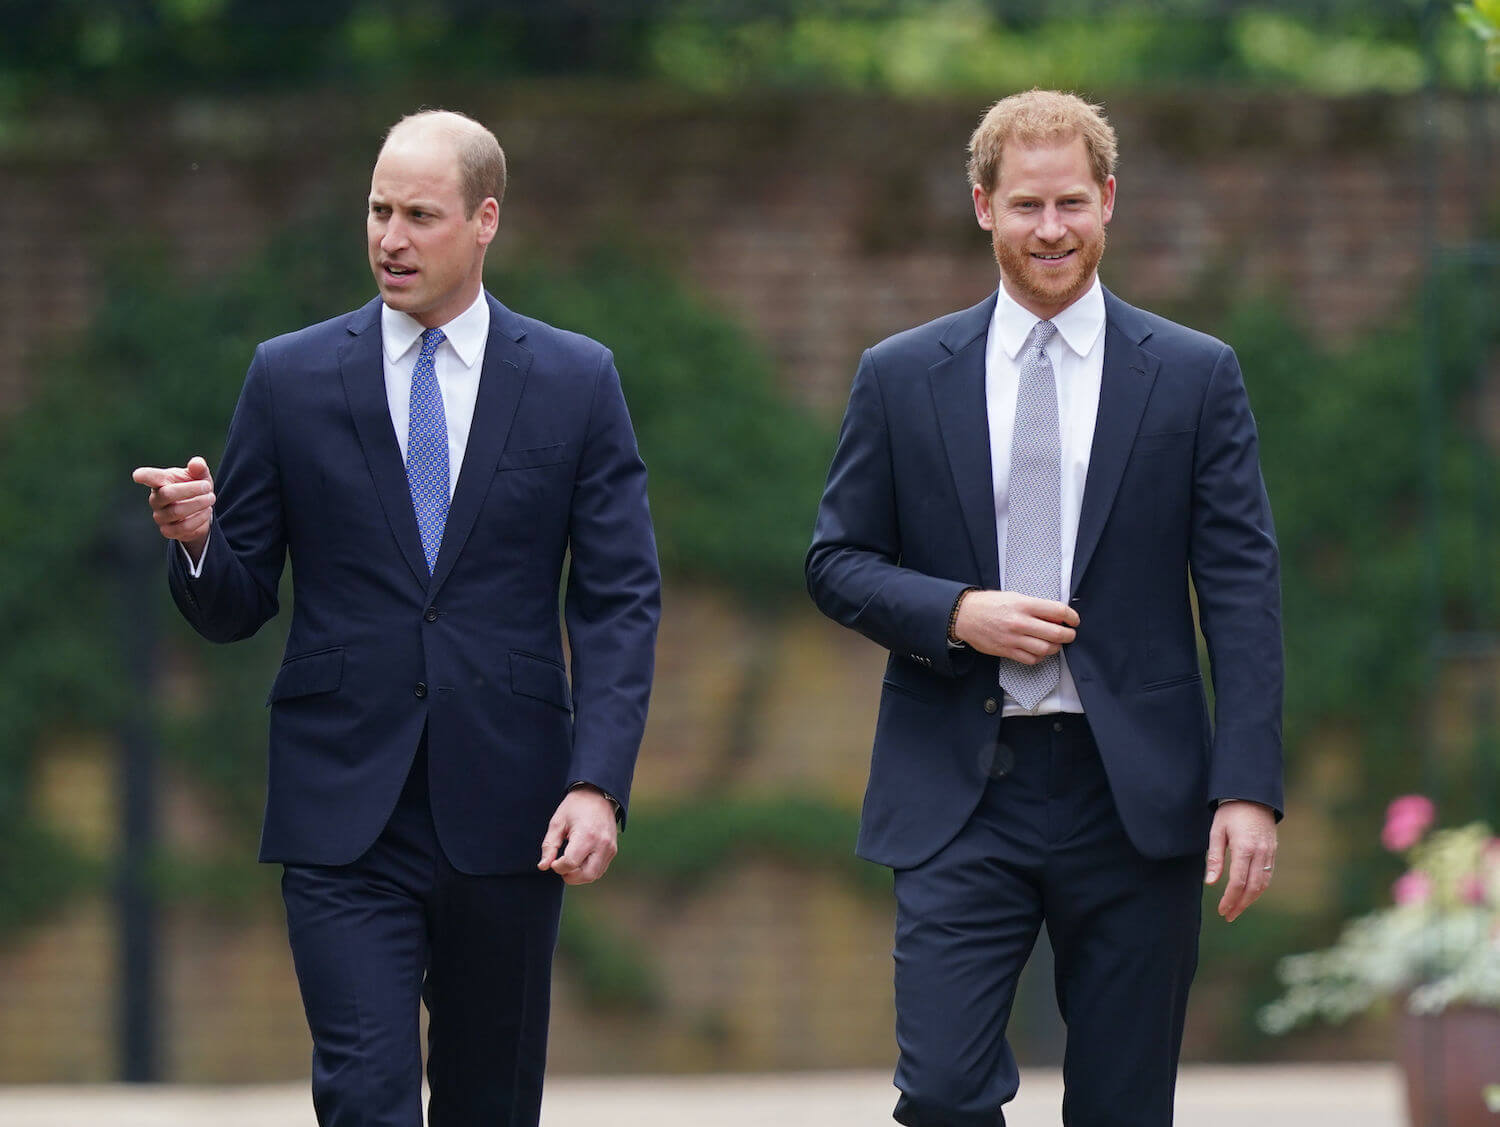 Prince William and Prince Harry walk side by side with Harry smiling, both dressed in dark suits